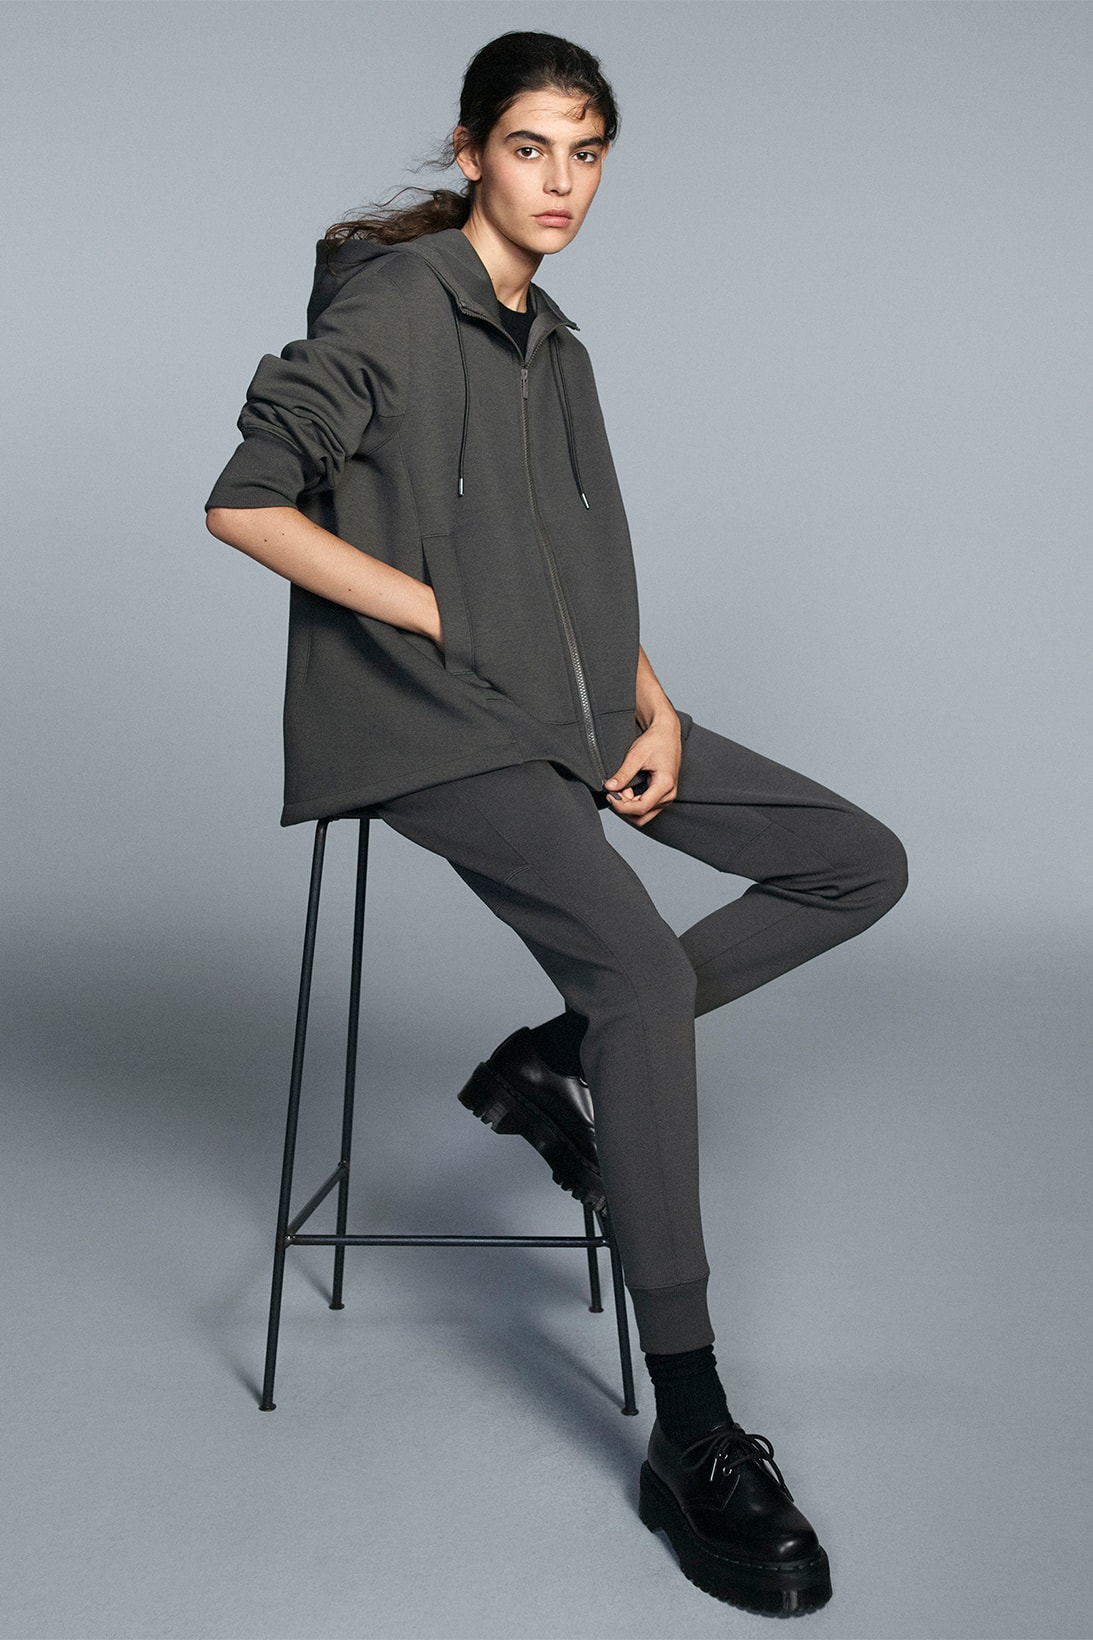 Uniqlo's Affordable Fashion Collaborations with High-End Designers +J  Collection 2021